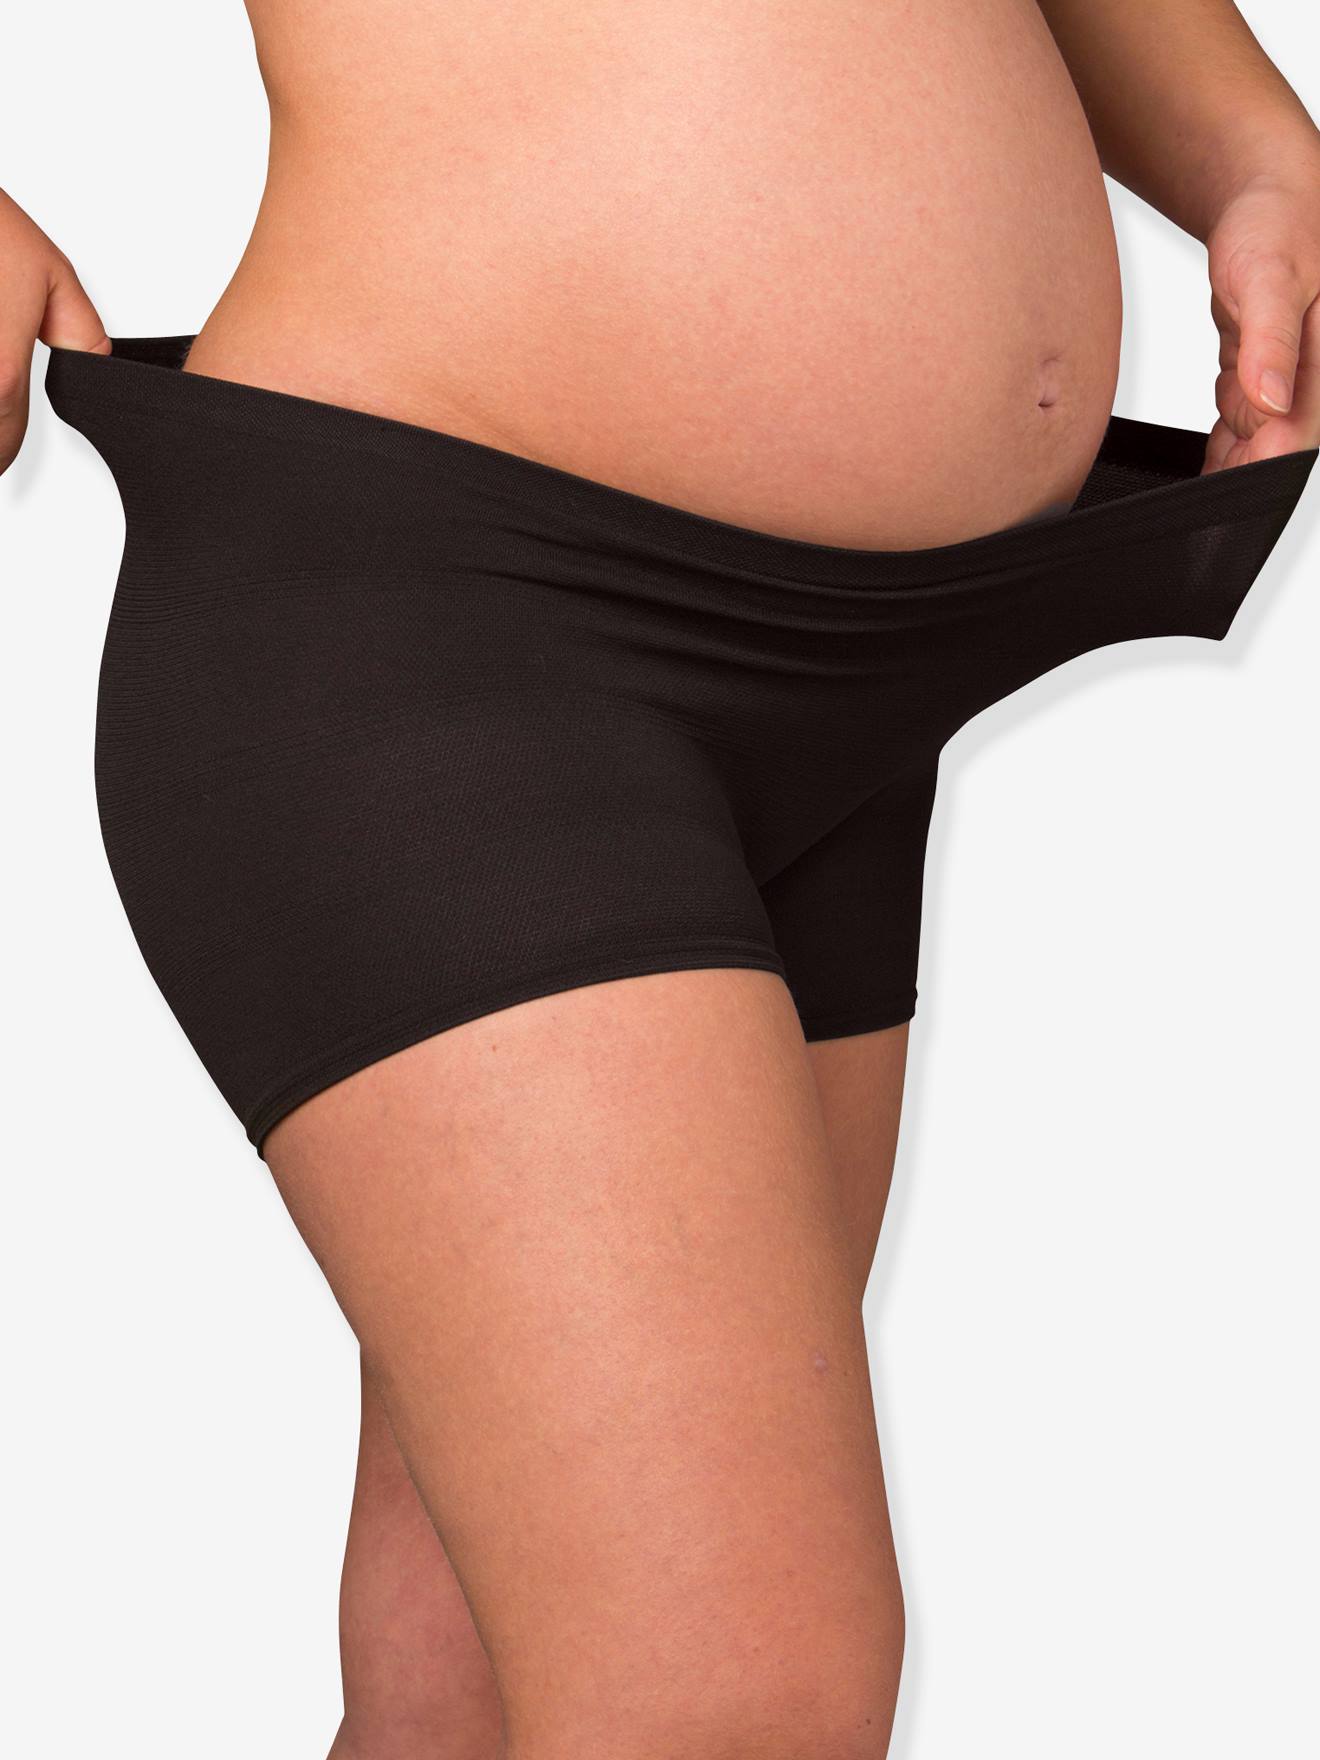 Pack of 2 Deluxe Maternity & Hospital Panties, Seamless, by CARRIWELL -  black